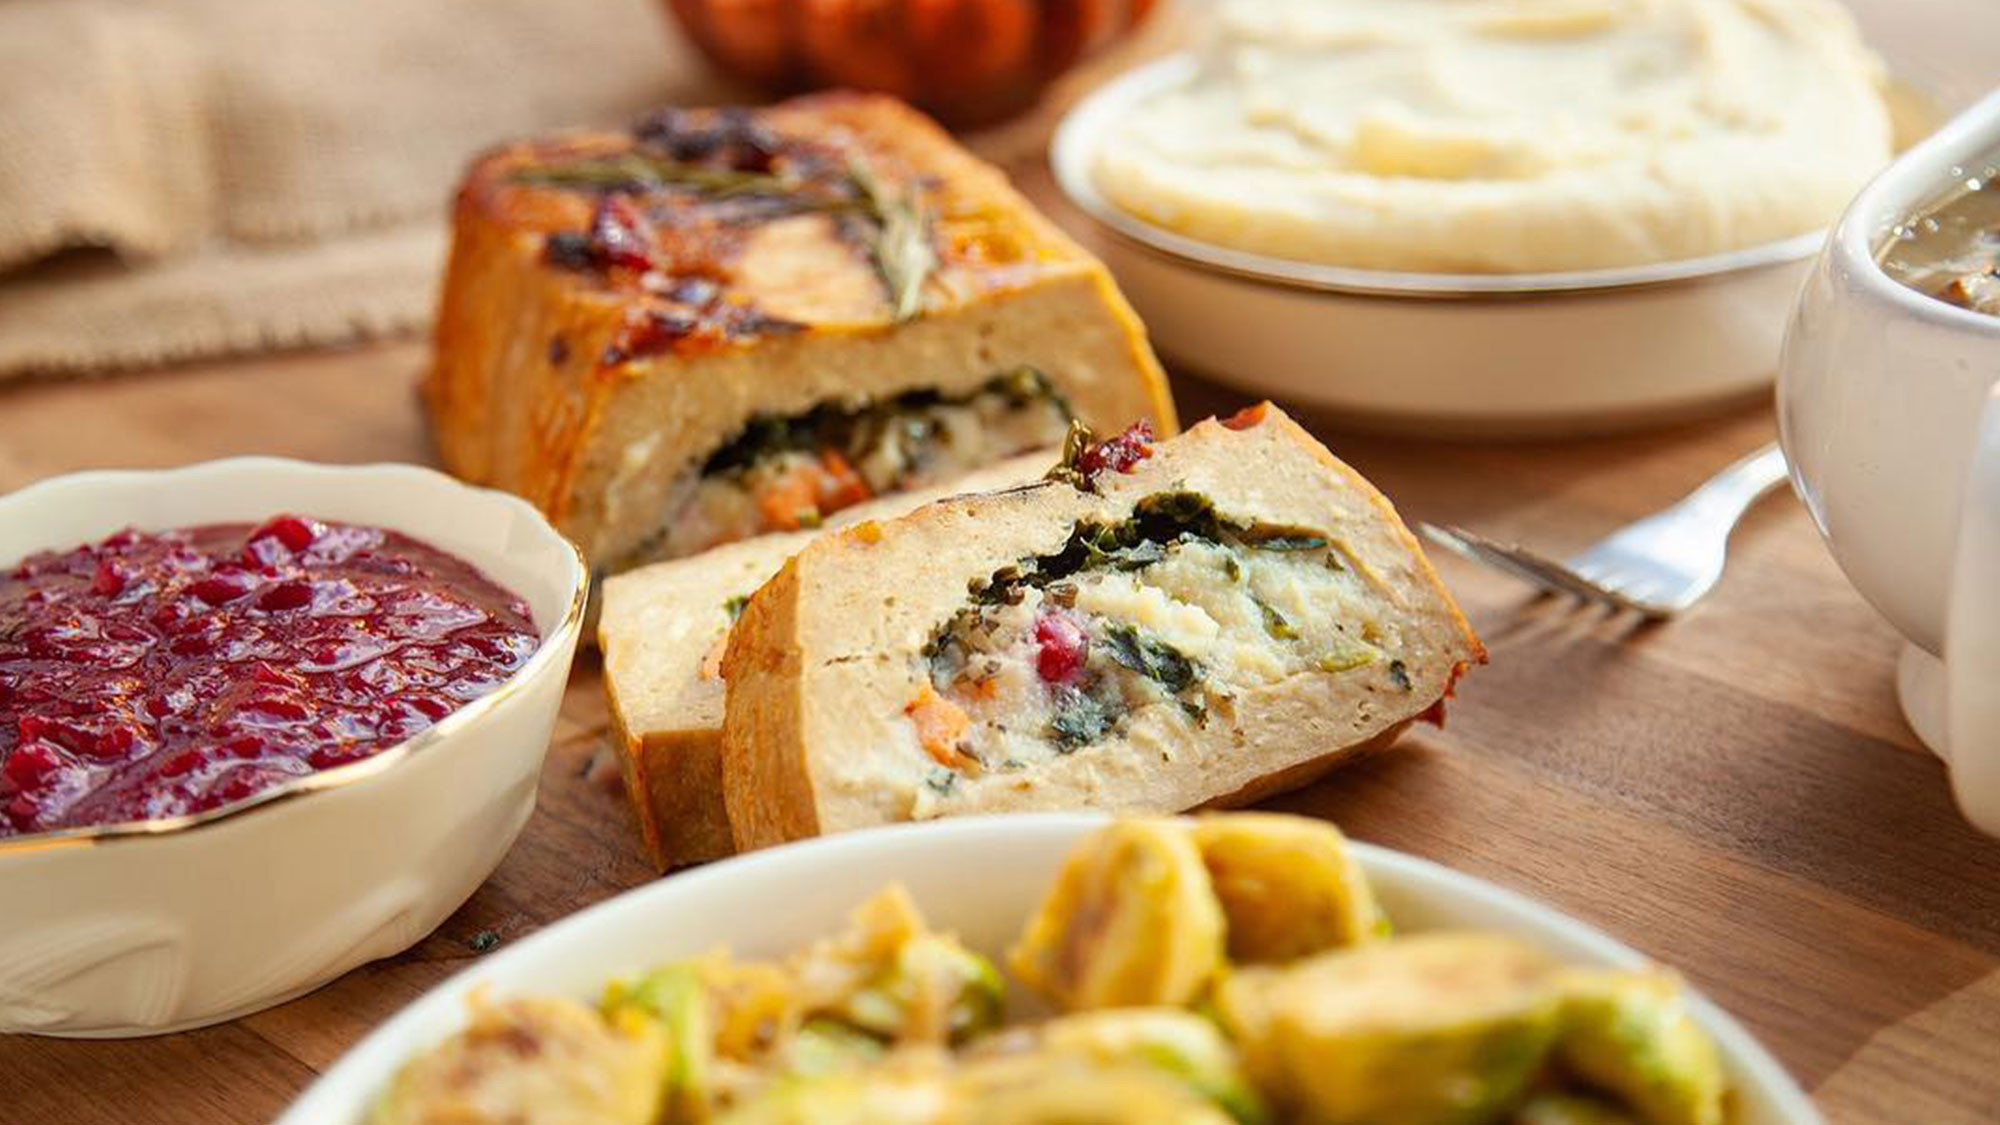 Vegetarian Thanksgiving Los Angeles
 Where to Eat Vegan Thanksgiving Dinner in Los Angeles